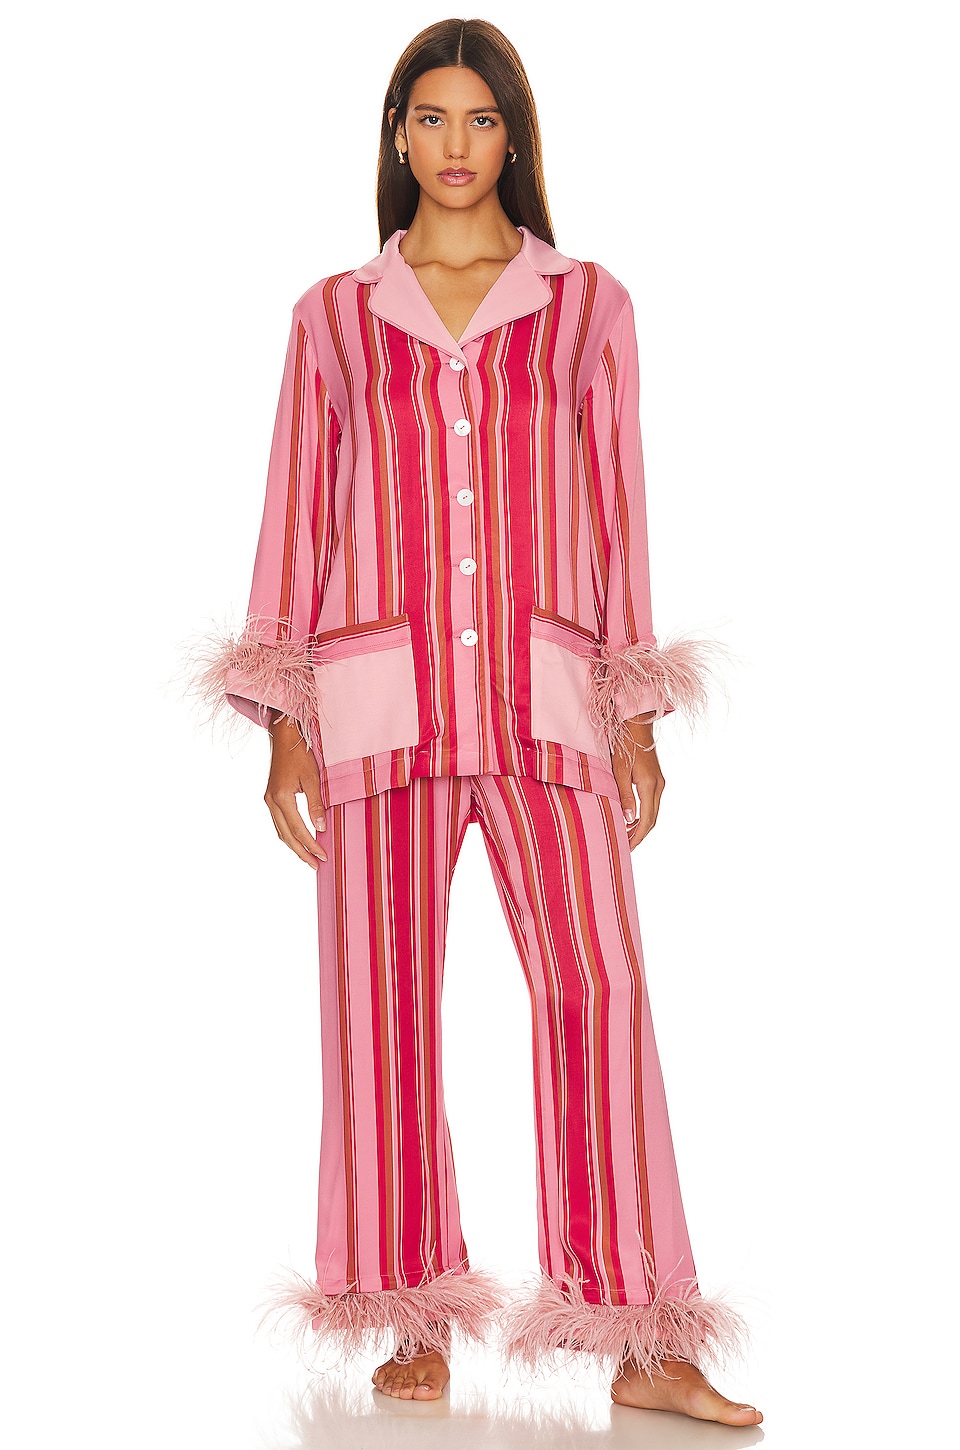 Sleeper Party Pajamas With Detachable Feathers in Multicolor